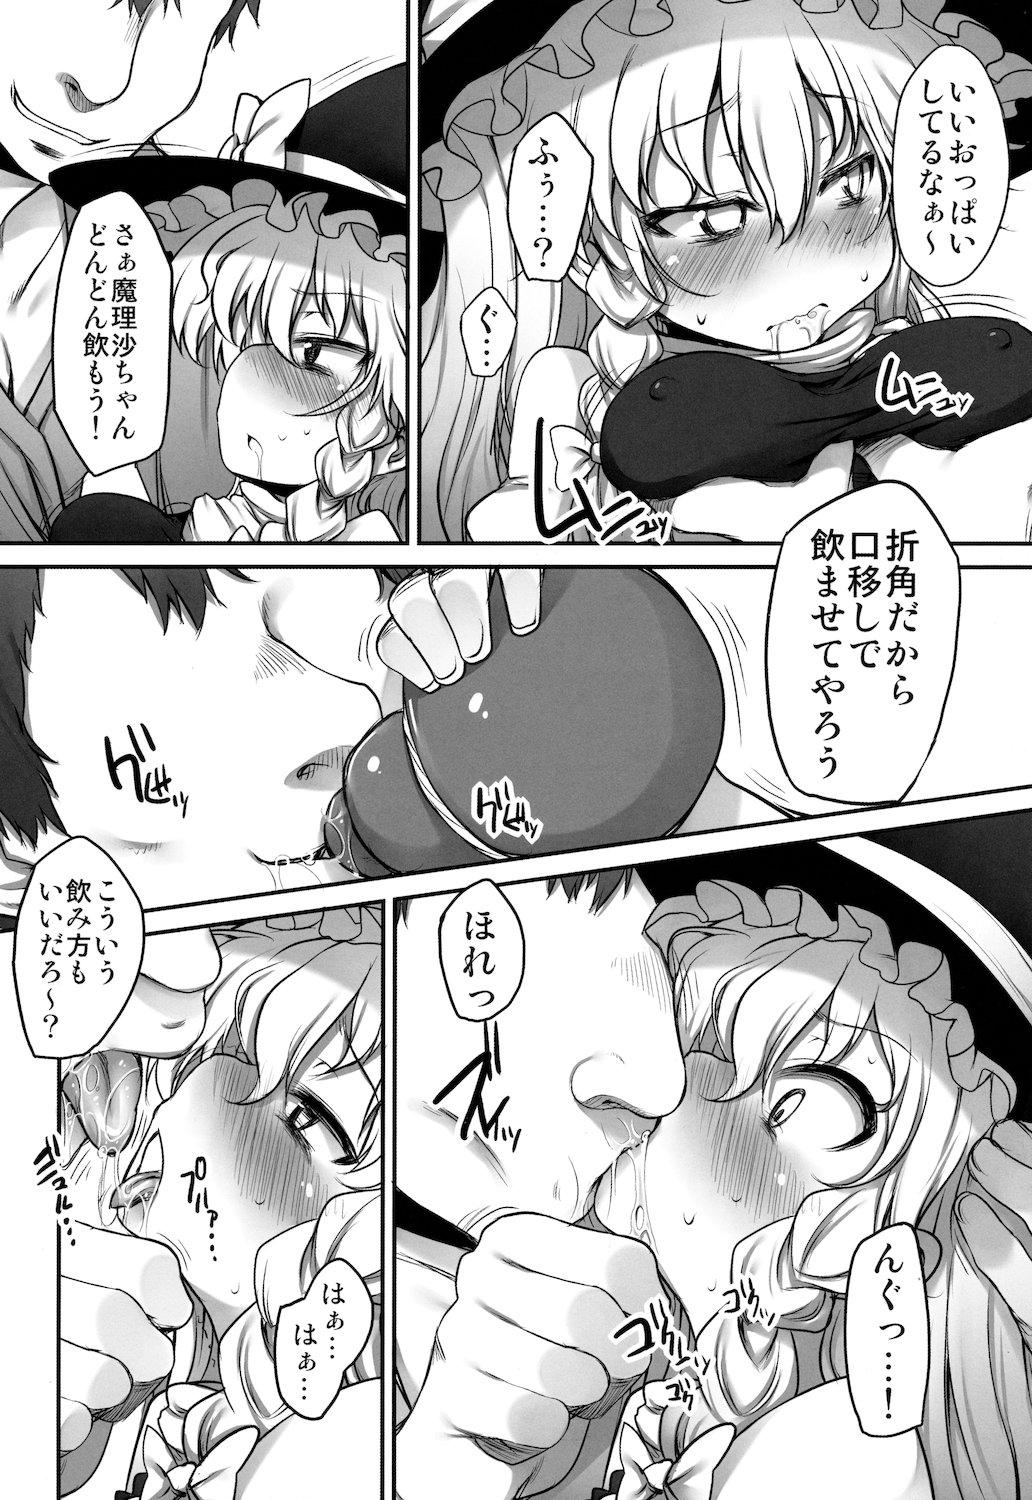 Squirting Gensoukyou no Utage - Touhou project Maid - Page 12